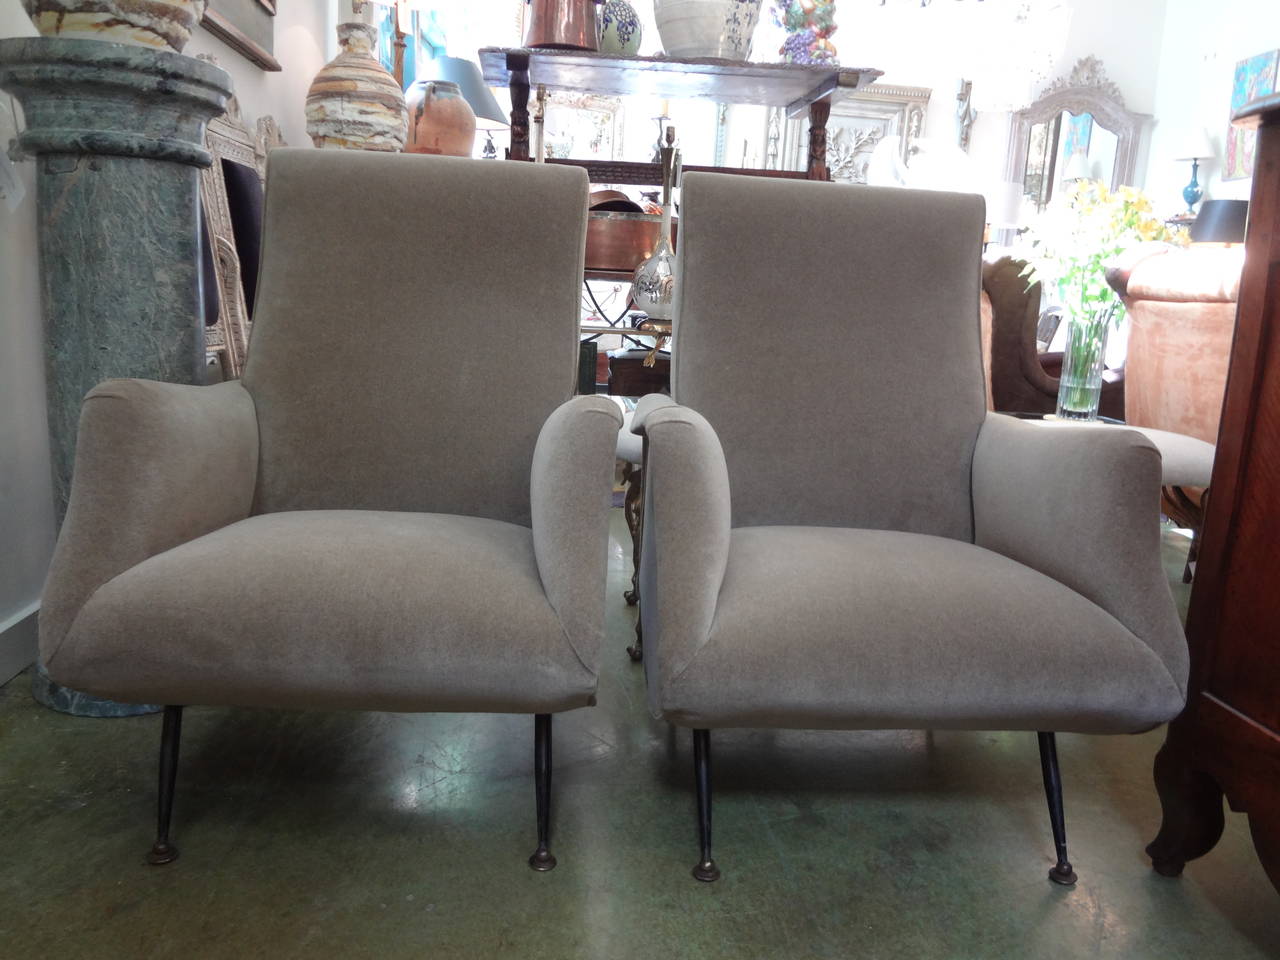 Sleek Pair of Italian Modernist Lounge Chairs in the style of Marco Zanuso for Arflex showing with elegant lines and tapered legs of patinated steel and bronze/brass feet. Taken down to frame and completely reupholstered in taupe mohair like fabric.